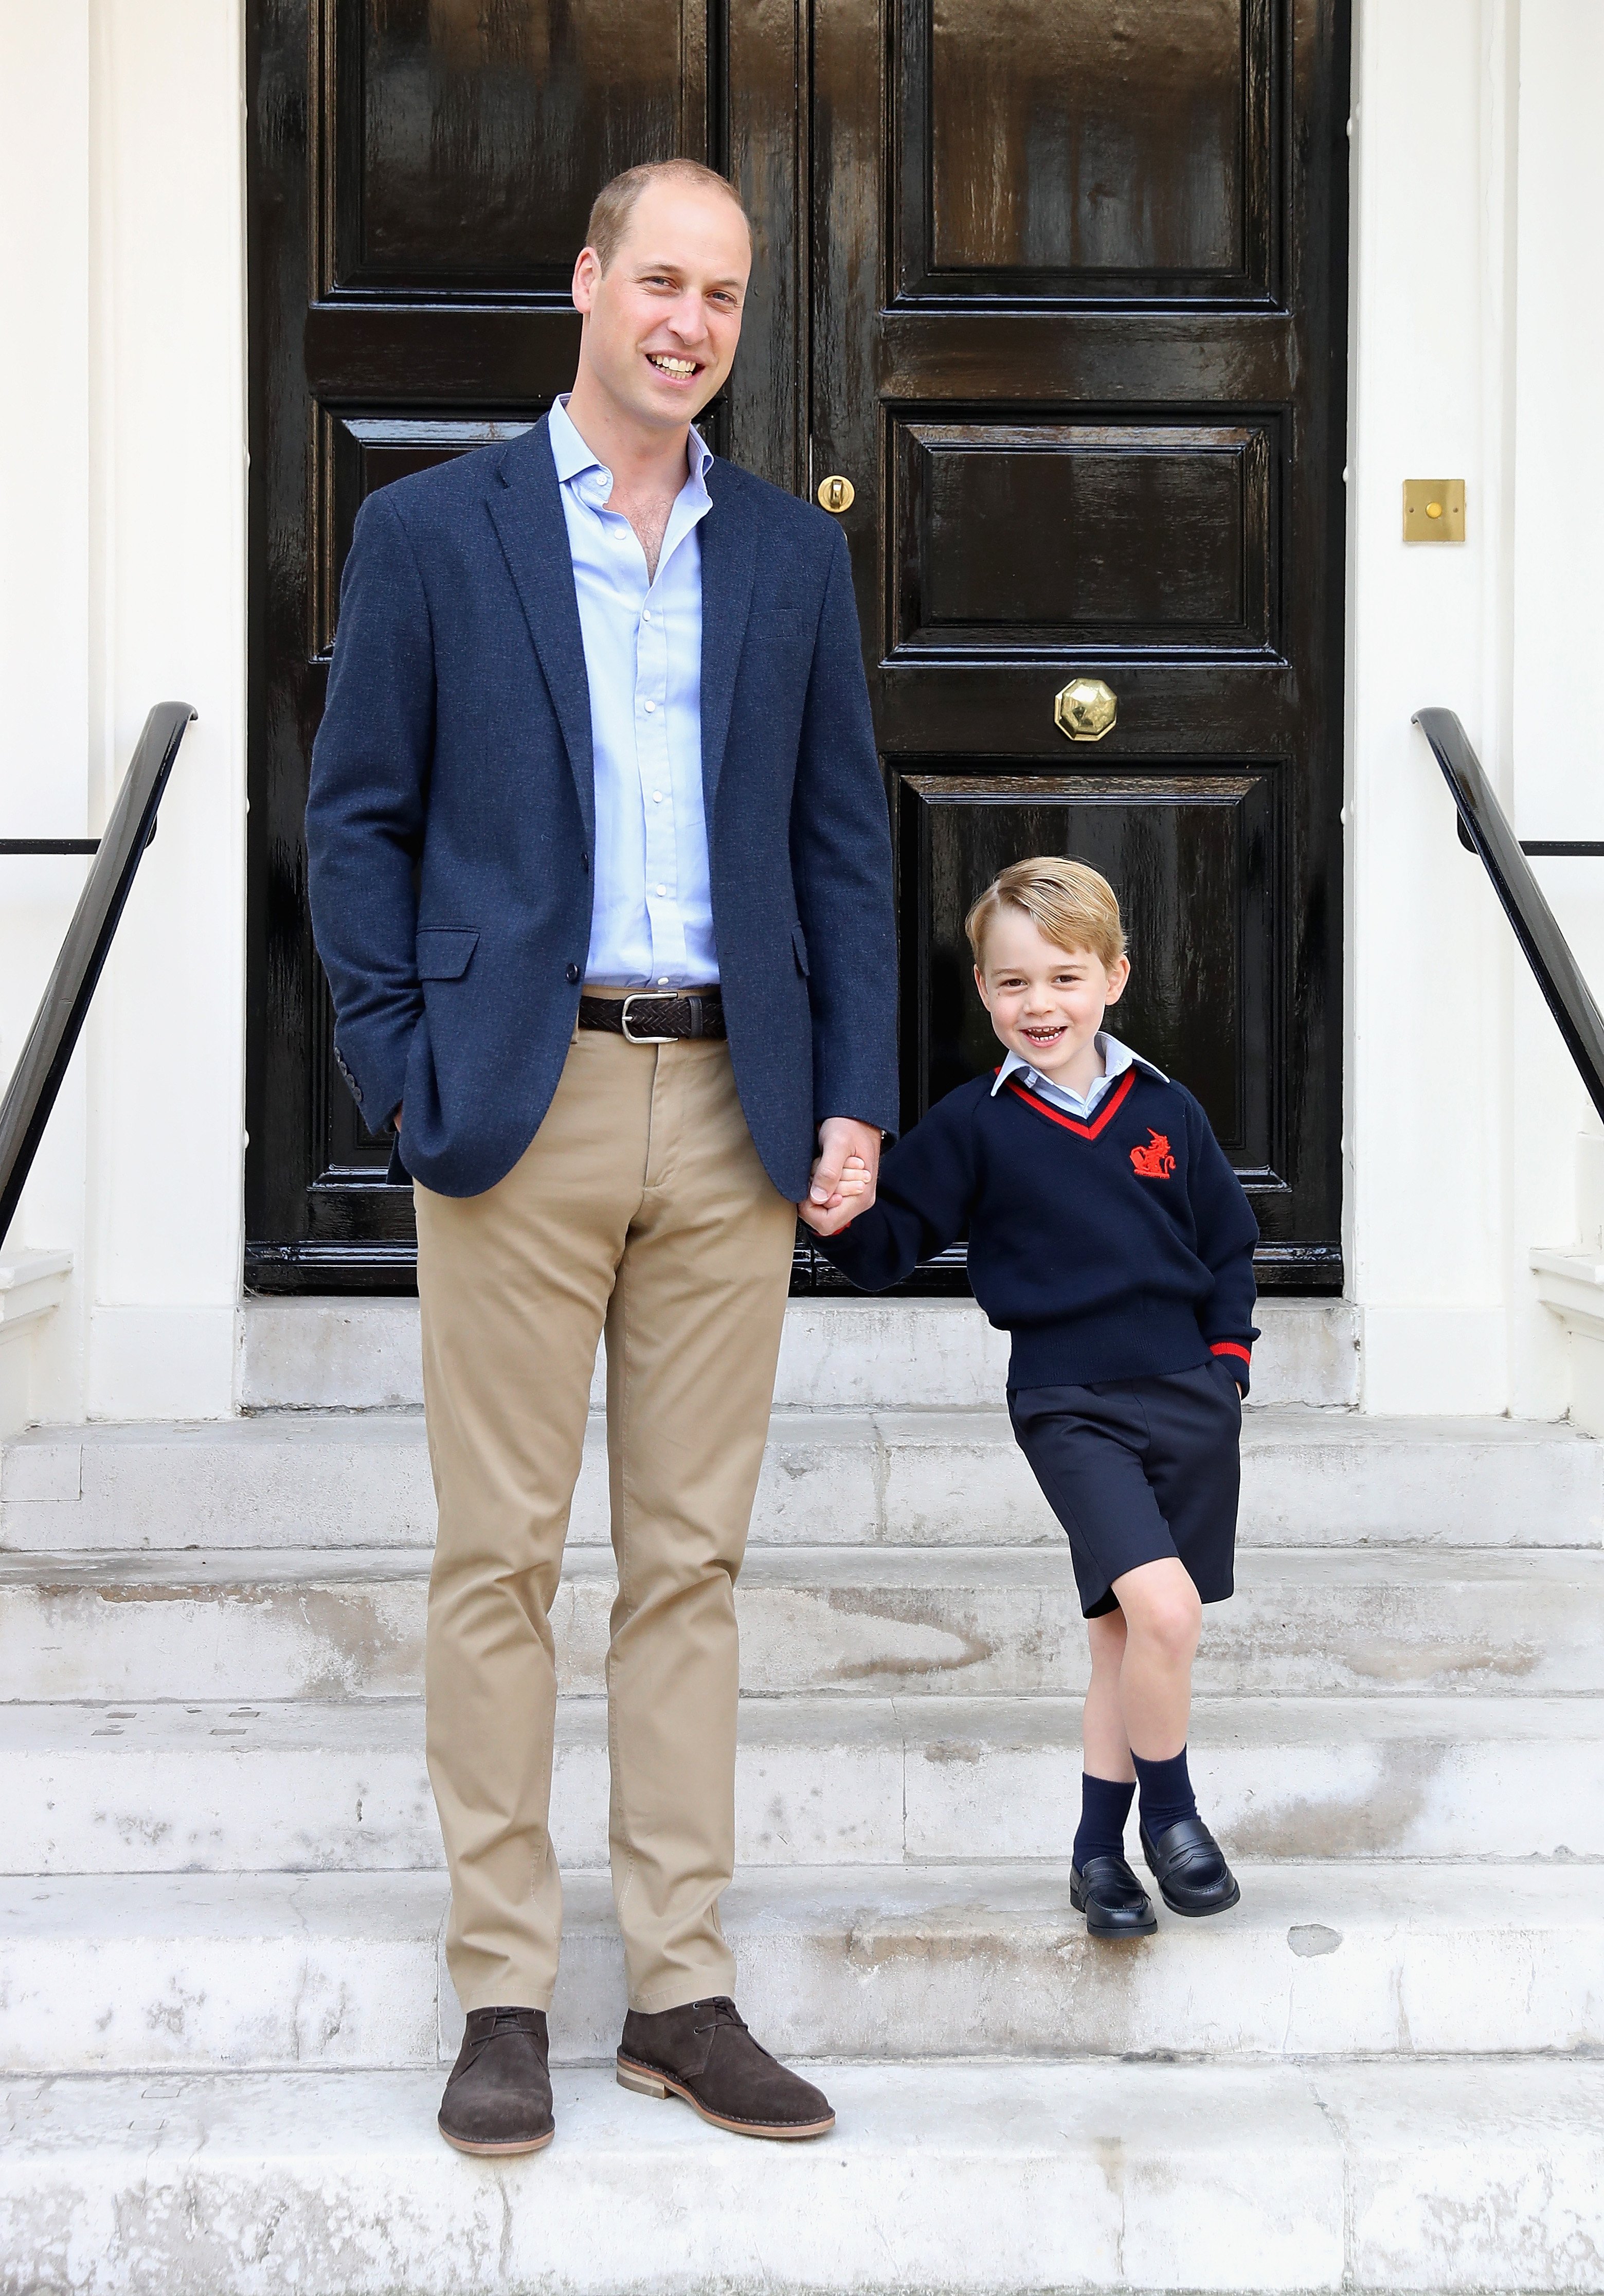 Prince William and his son, Prince George on his first day of school on September 7, 2017, in London, England. | Source: Getty Images.